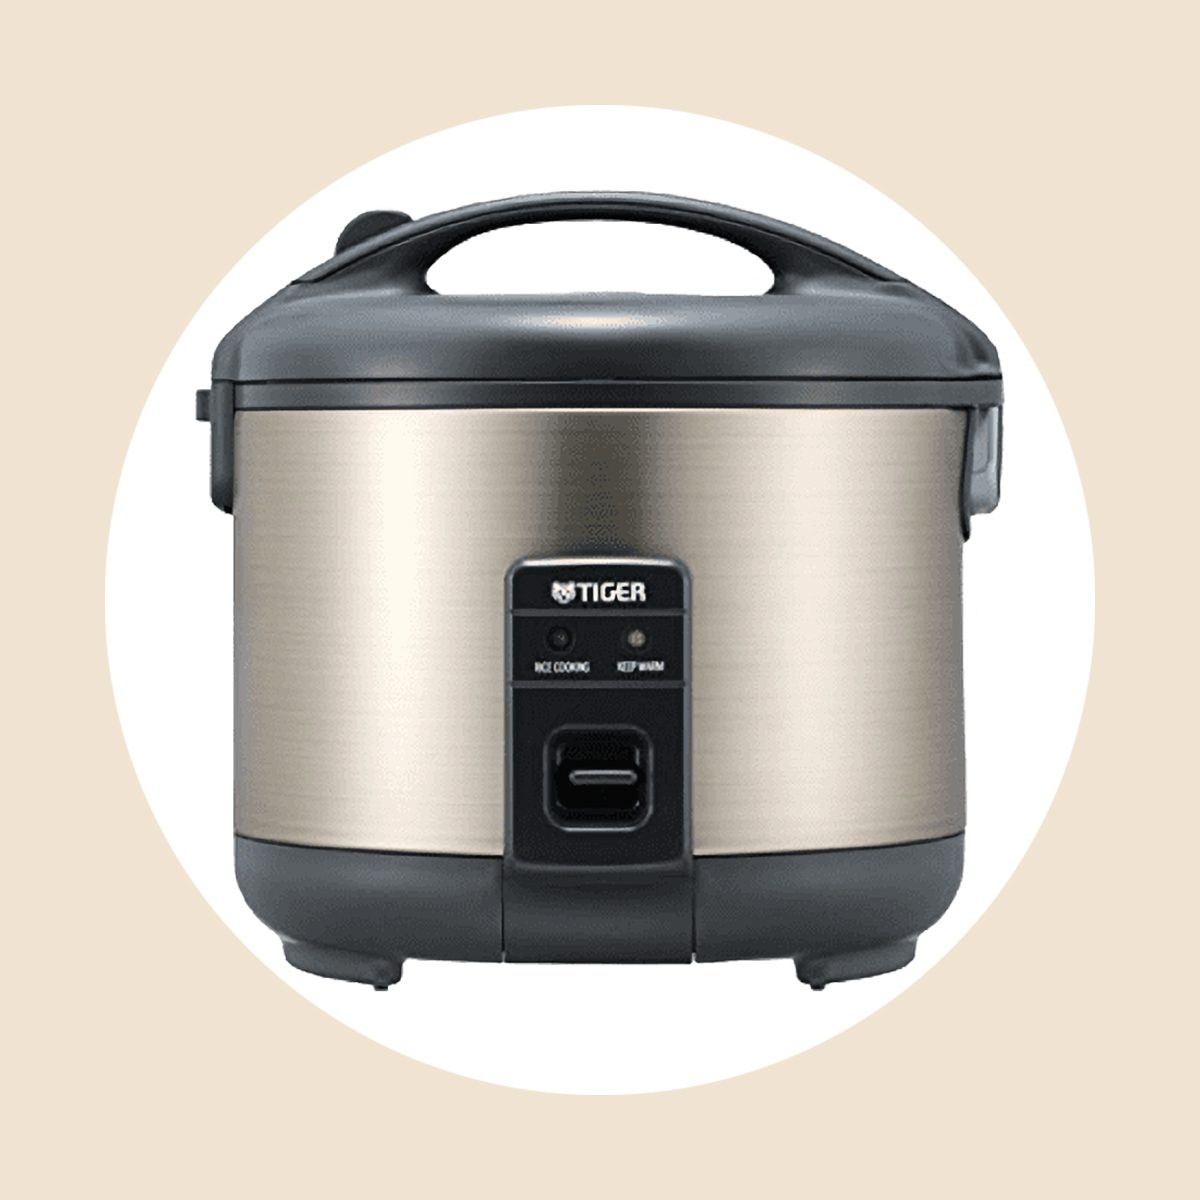 Best rice cookers 2022: Our recommended cookers for the fluffiest